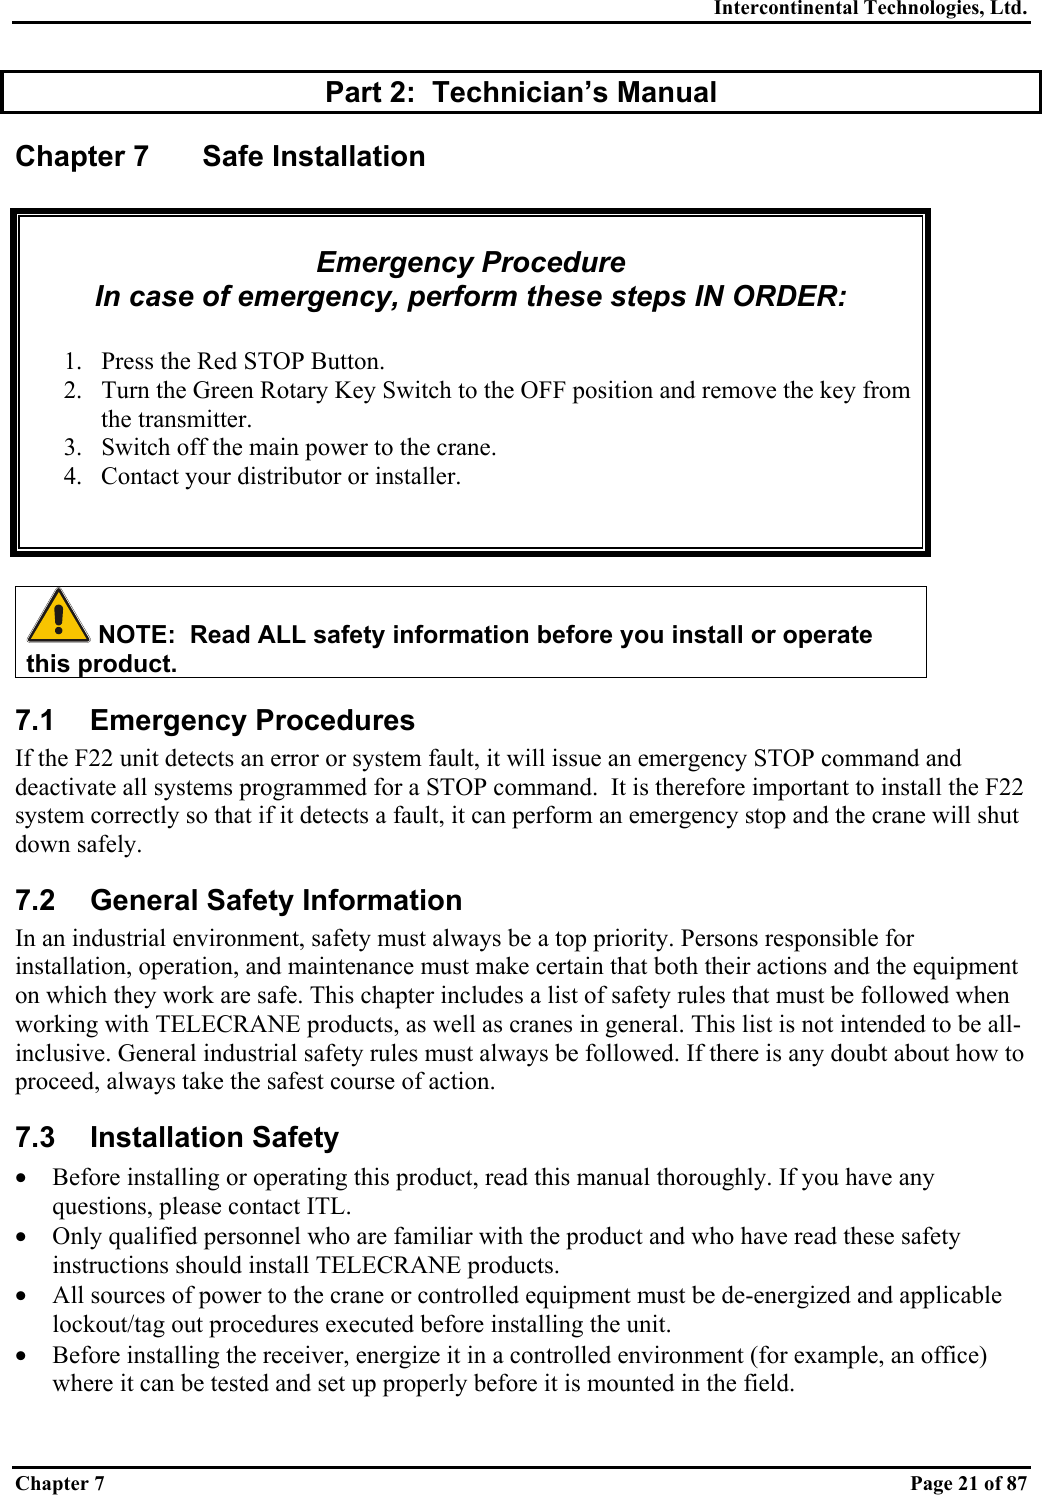 Intercontinental Technologies, Ltd. Chapter 7    Page 21 of 87 Part 2:  Technician’s Manual Chapter 7  Safe Installation   Emergency Procedure In case of emergency, perform these steps IN ORDER:  1.  Press the Red STOP Button. 2.  Turn the Green Rotary Key Switch to the OFF position and remove the key from the transmitter. 3.  Switch off the main power to the crane. 4.  Contact your distributor or installer.     NOTE:  Read ALL safety information before you install or operate this product. 7.1 Emergency Procedures If the F22 unit detects an error or system fault, it will issue an emergency STOP command and deactivate all systems programmed for a STOP command.  It is therefore important to install the F22 system correctly so that if it detects a fault, it can perform an emergency stop and the crane will shut down safely. 7.2  General Safety Information In an industrial environment, safety must always be a top priority. Persons responsible for installation, operation, and maintenance must make certain that both their actions and the equipment on which they work are safe. This chapter includes a list of safety rules that must be followed when working with TELECRANE products, as well as cranes in general. This list is not intended to be all-inclusive. General industrial safety rules must always be followed. If there is any doubt about how to proceed, always take the safest course of action. 7.3 Installation Safety •  Before installing or operating this product, read this manual thoroughly. If you have any questions, please contact ITL. •  Only qualified personnel who are familiar with the product and who have read these safety instructions should install TELECRANE products. •  All sources of power to the crane or controlled equipment must be de-energized and applicable lockout/tag out procedures executed before installing the unit. •  Before installing the receiver, energize it in a controlled environment (for example, an office) where it can be tested and set up properly before it is mounted in the field. 